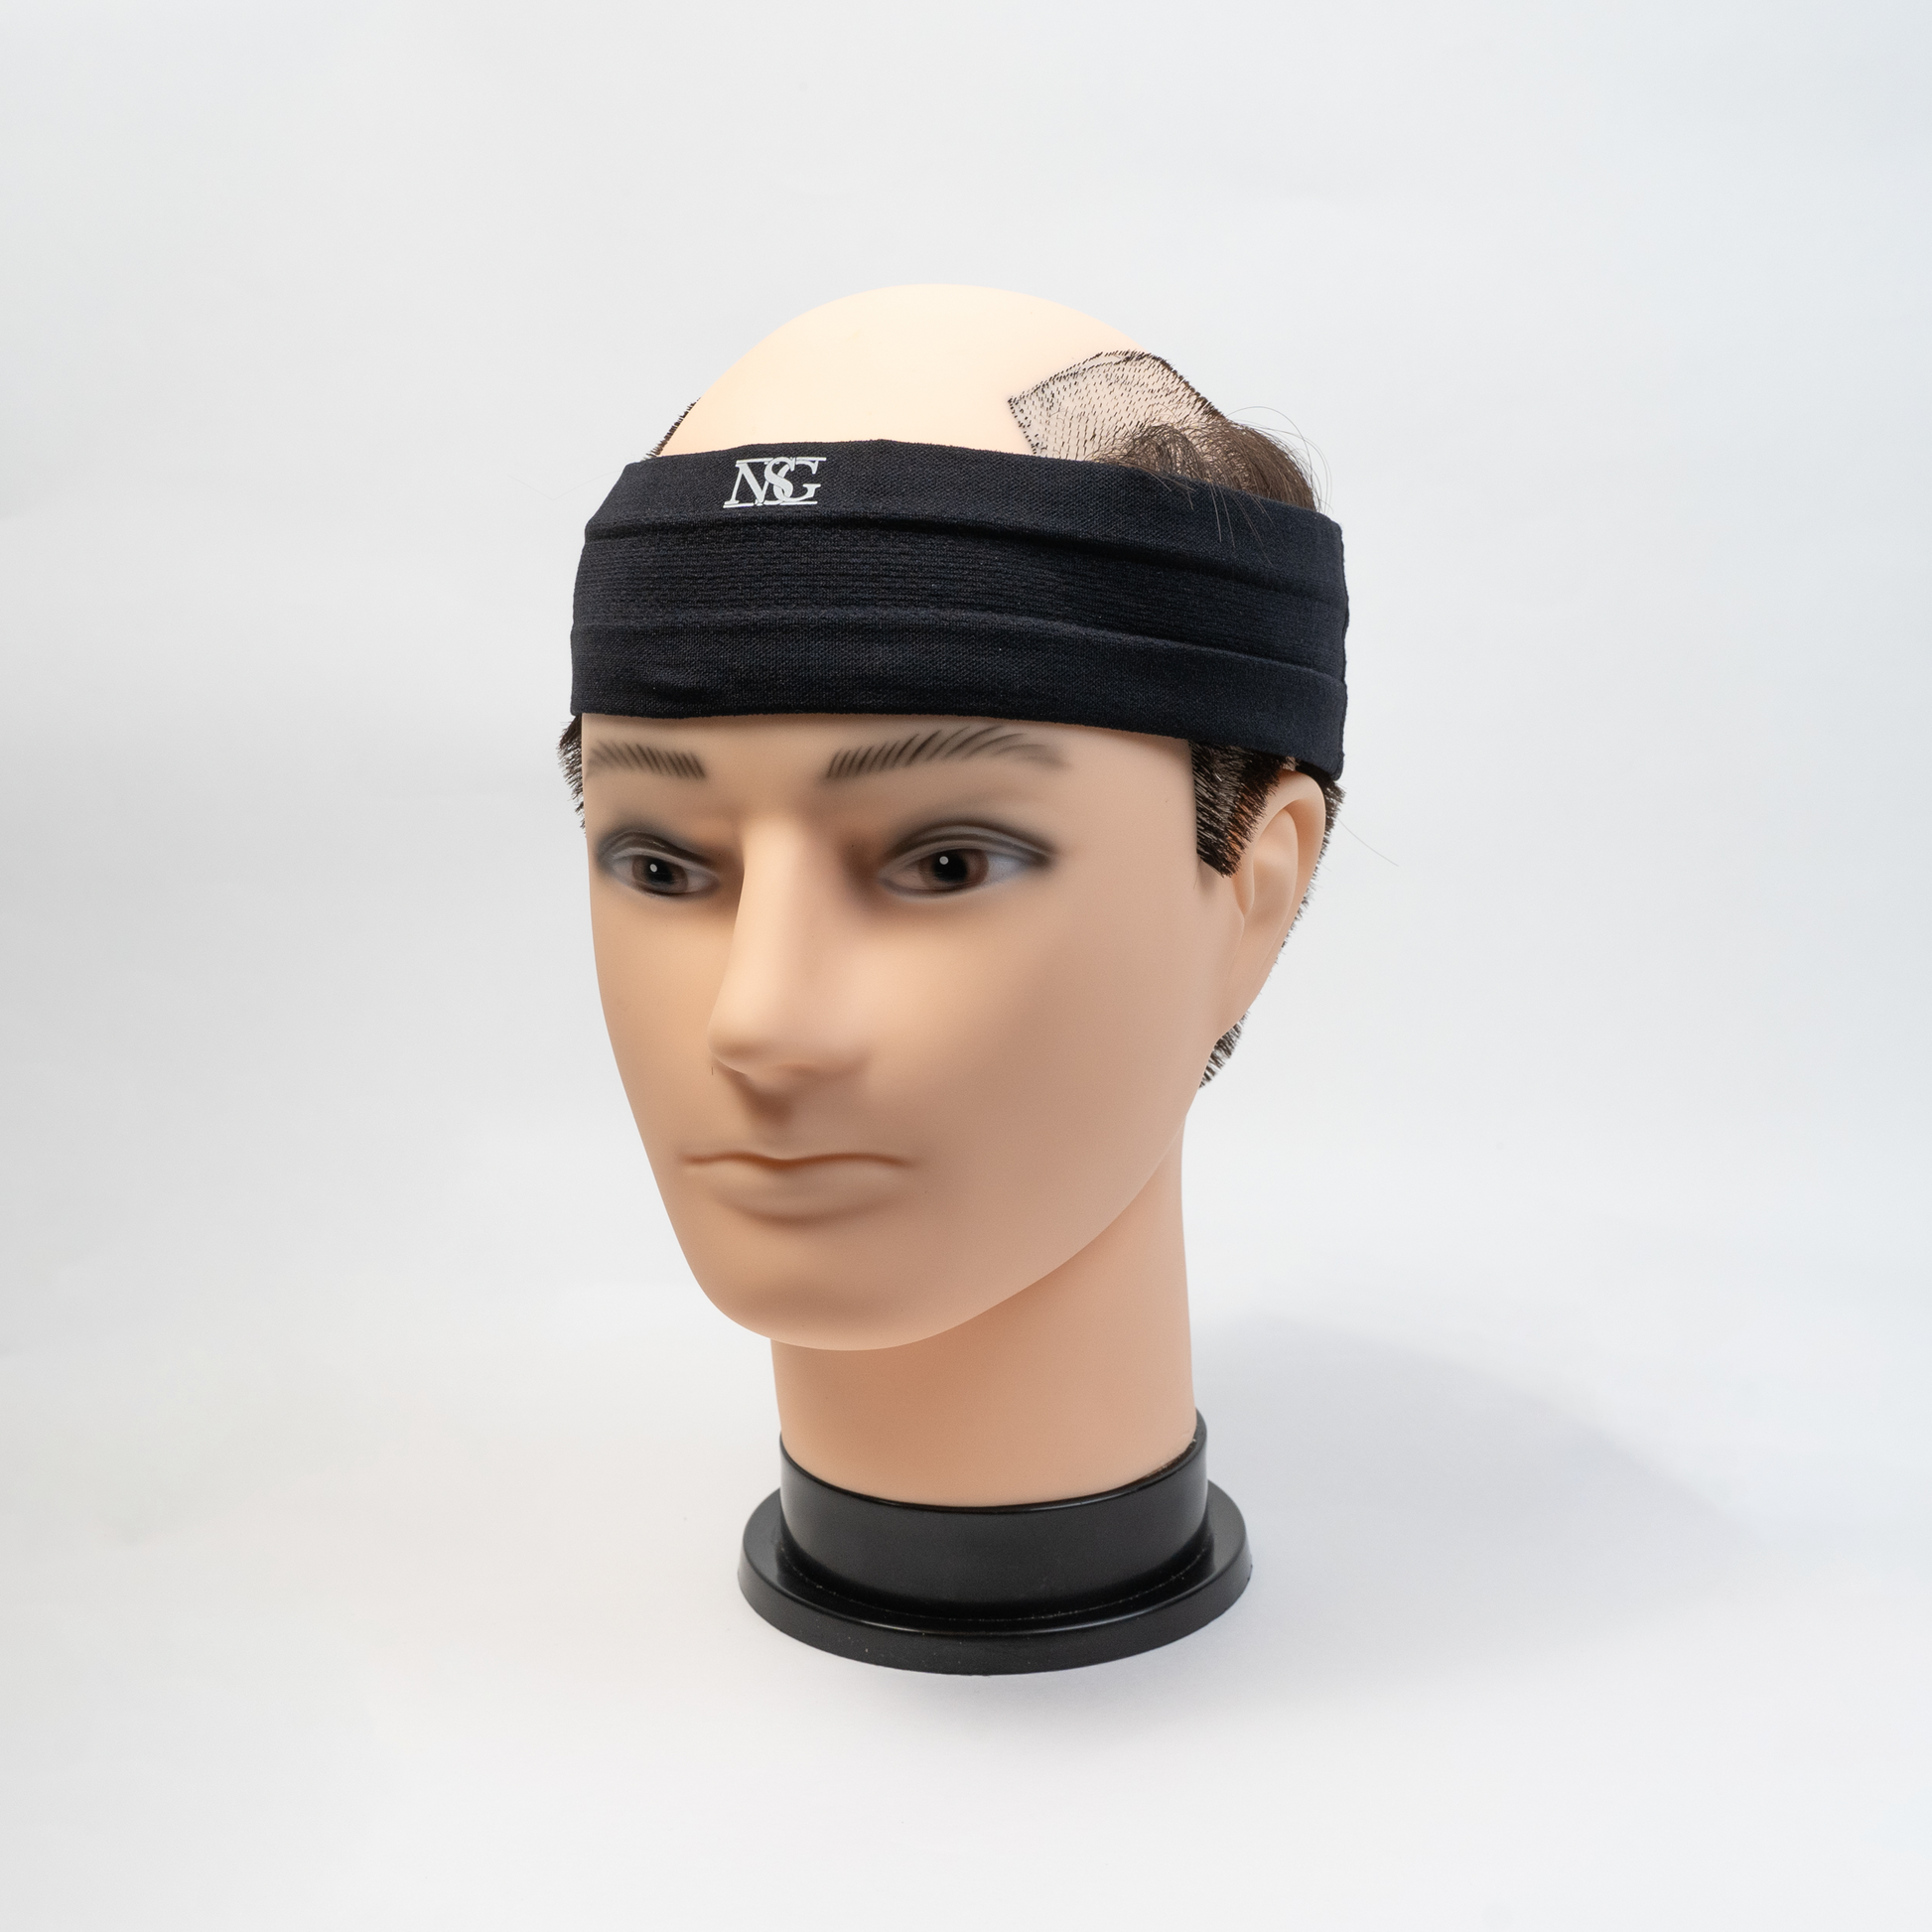 NSG Headband in black with moisture-wicking fabric for active wear